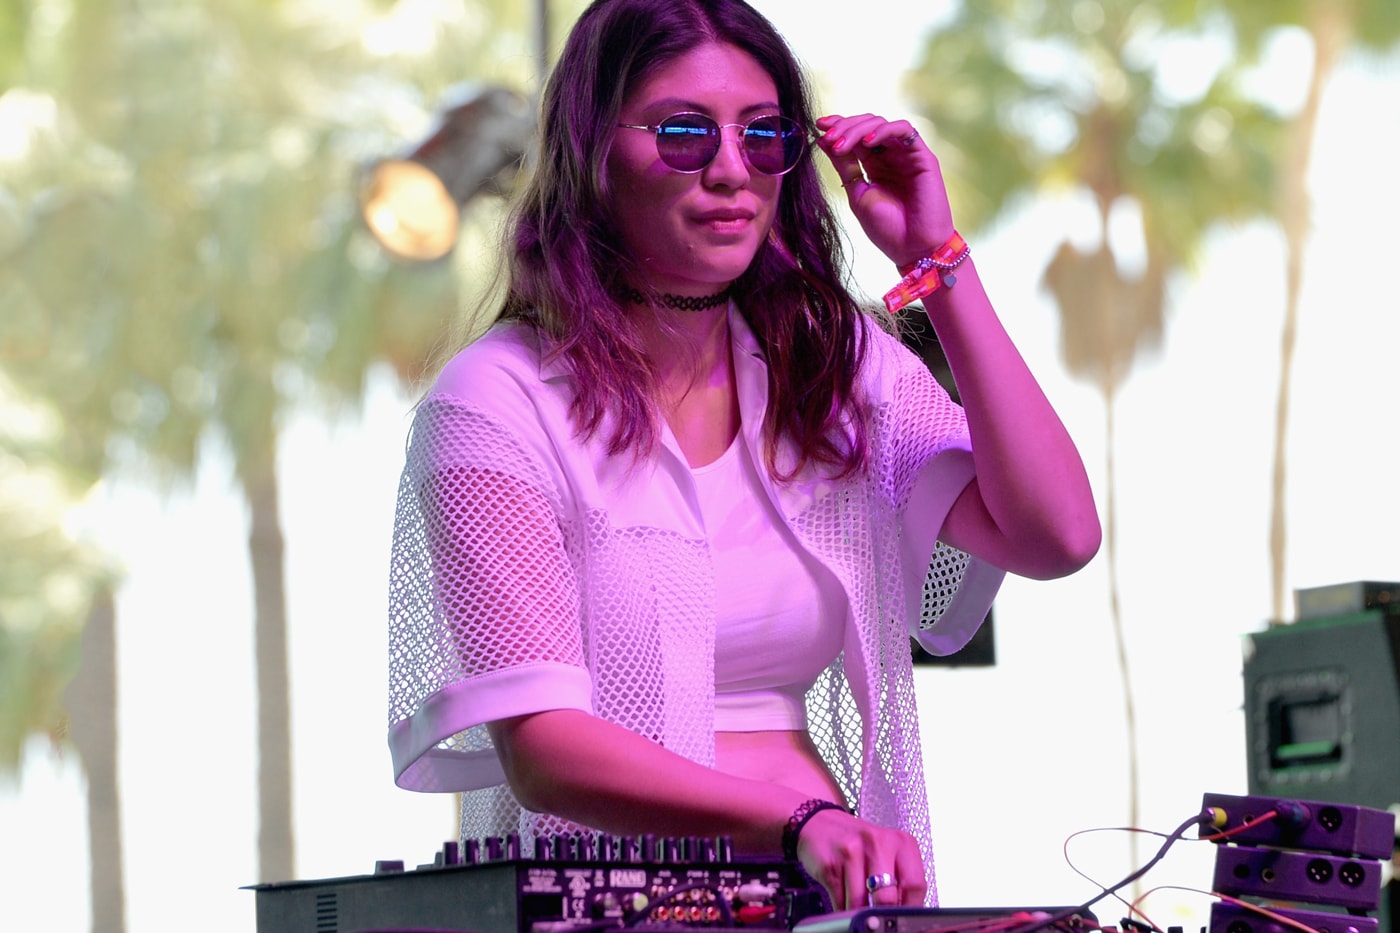 We Interview "Astronautica" and Debut the "Palm Springs" Video